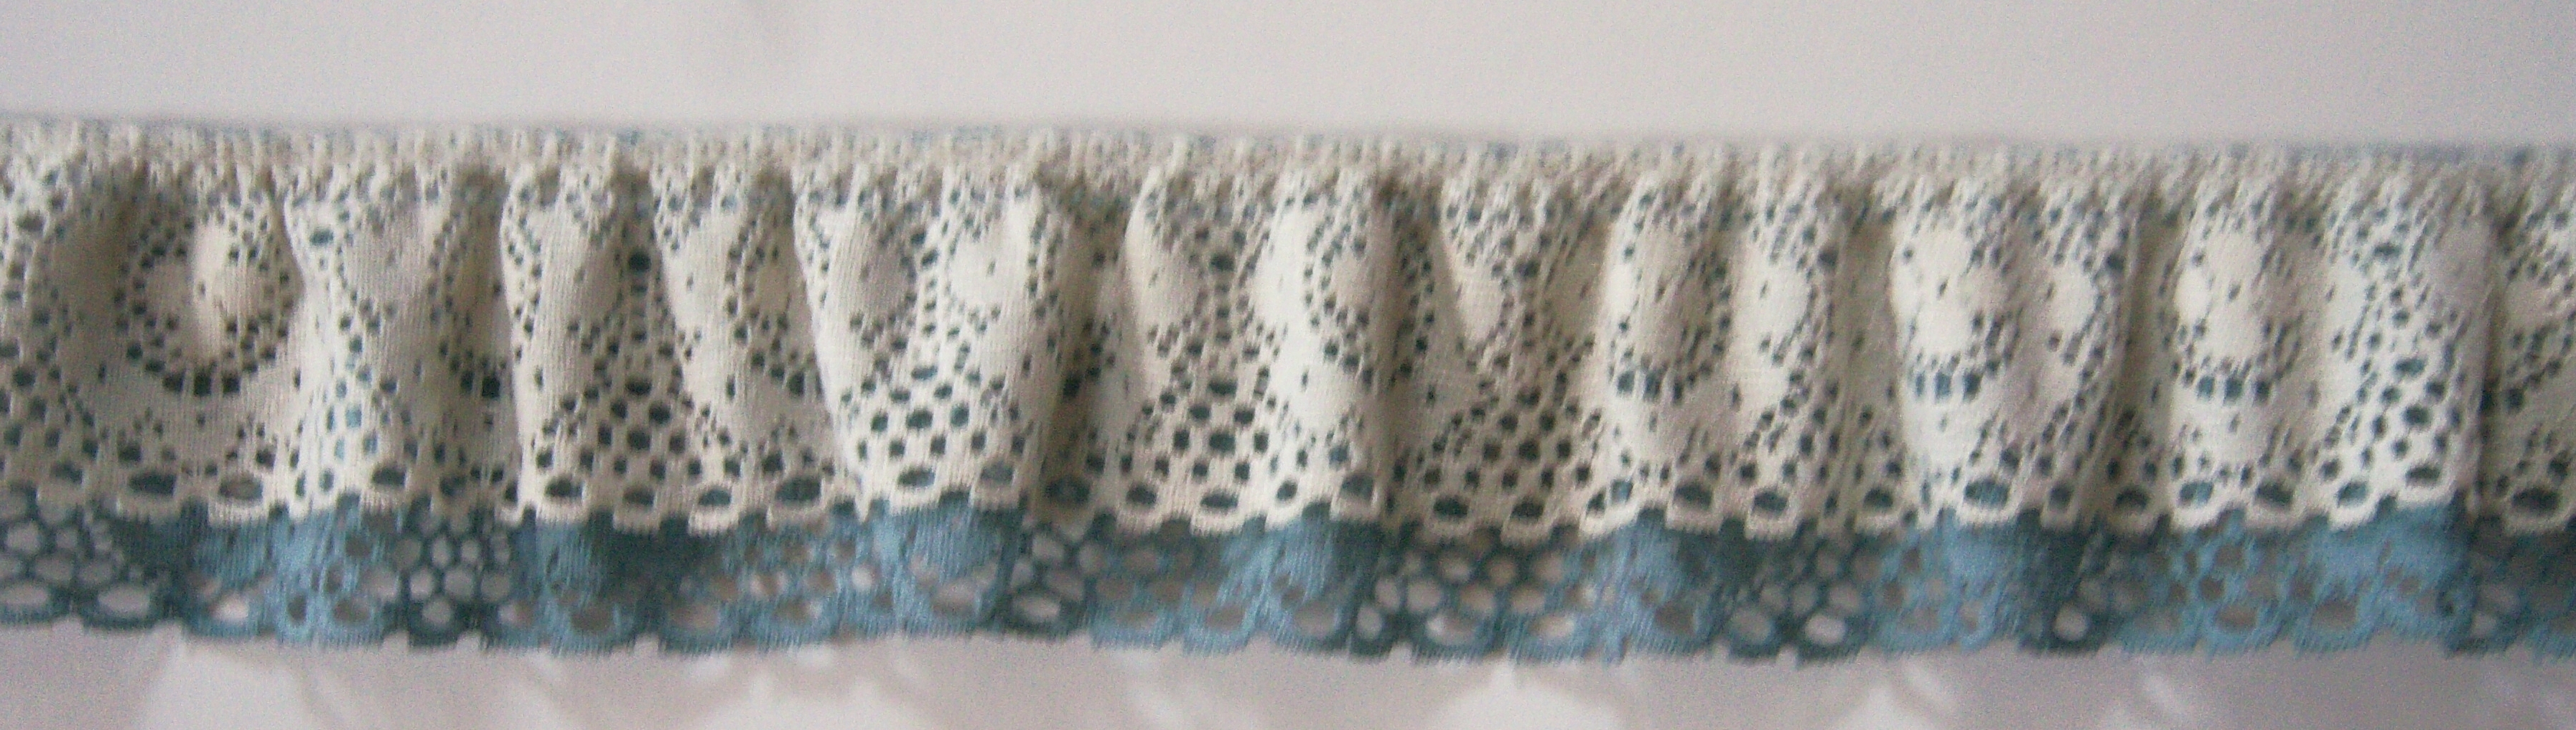 Ivory/Country Blue 2" Double Gathered Lace